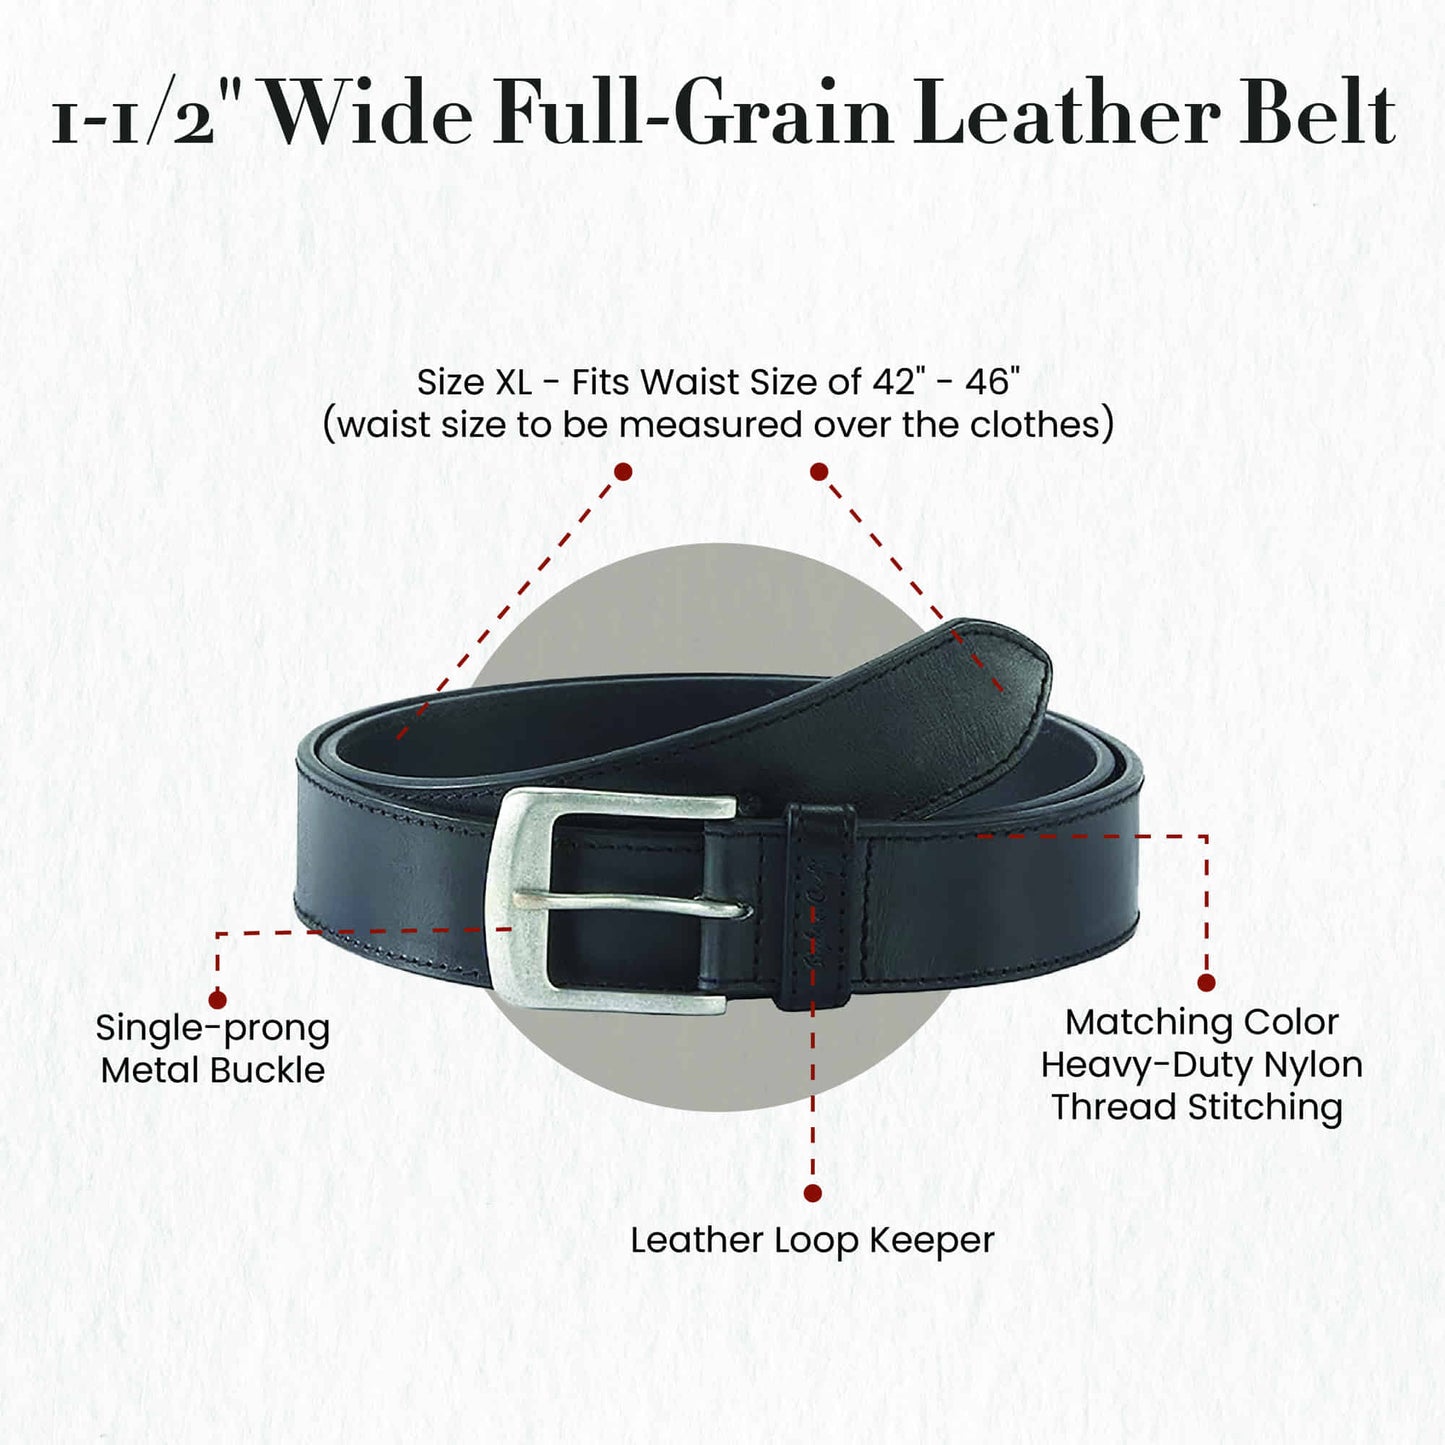 392701-XL - one and a half inch wide extra large size leather belt in black color full grain leather - front view showing the details